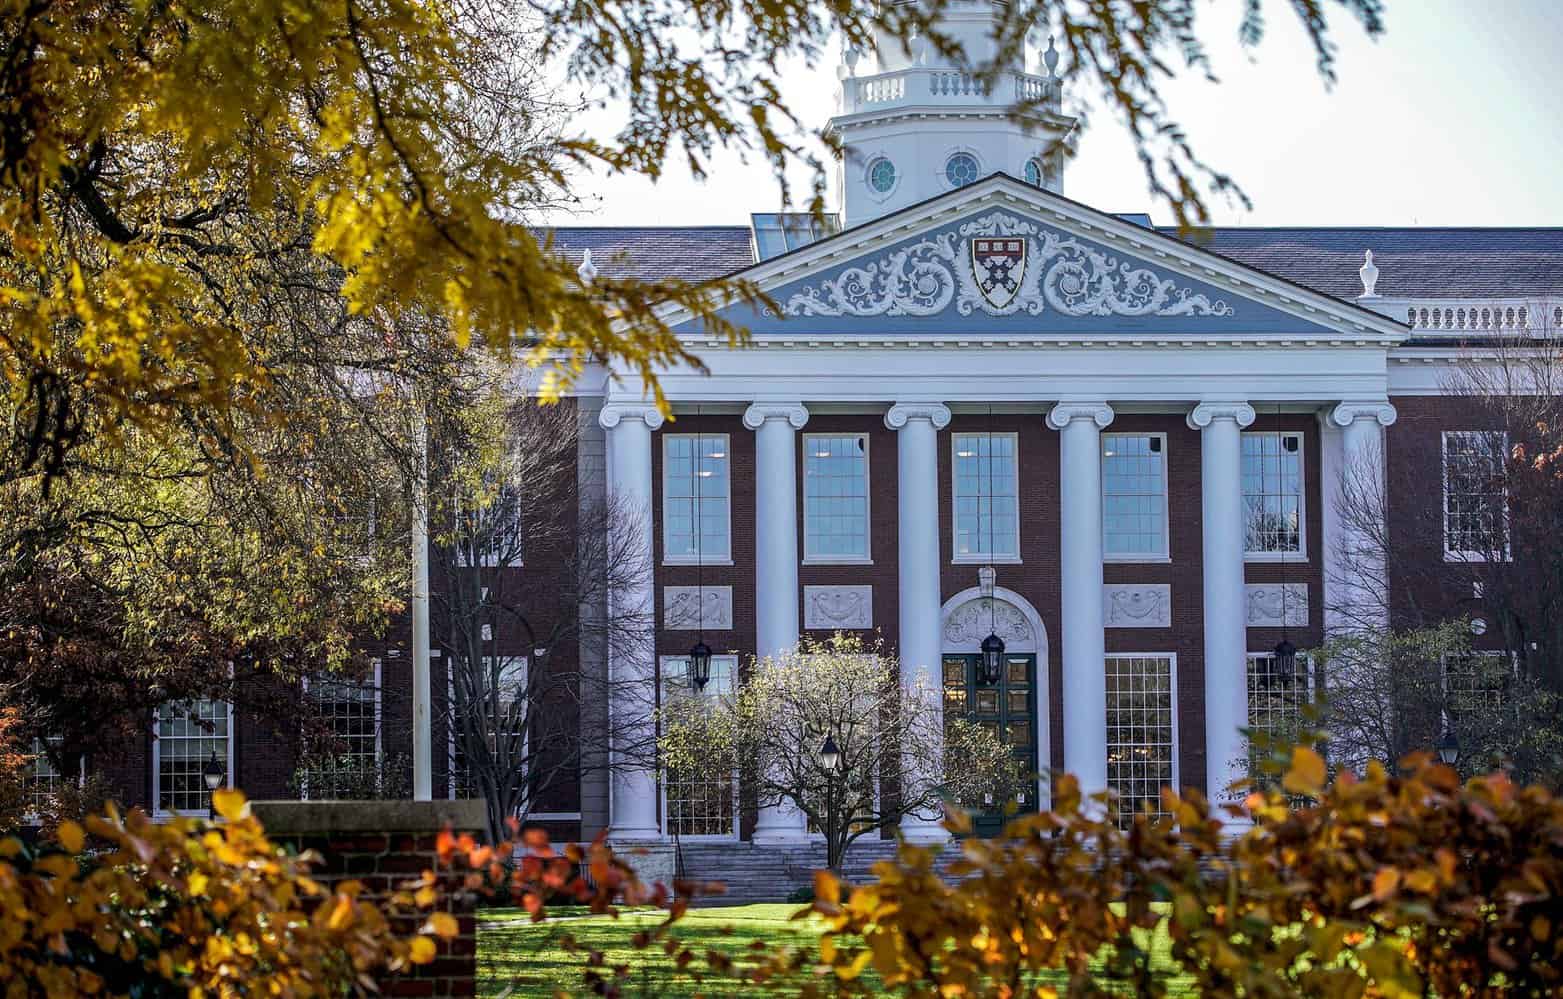 Student Reviews of the Best Business Schools in the World